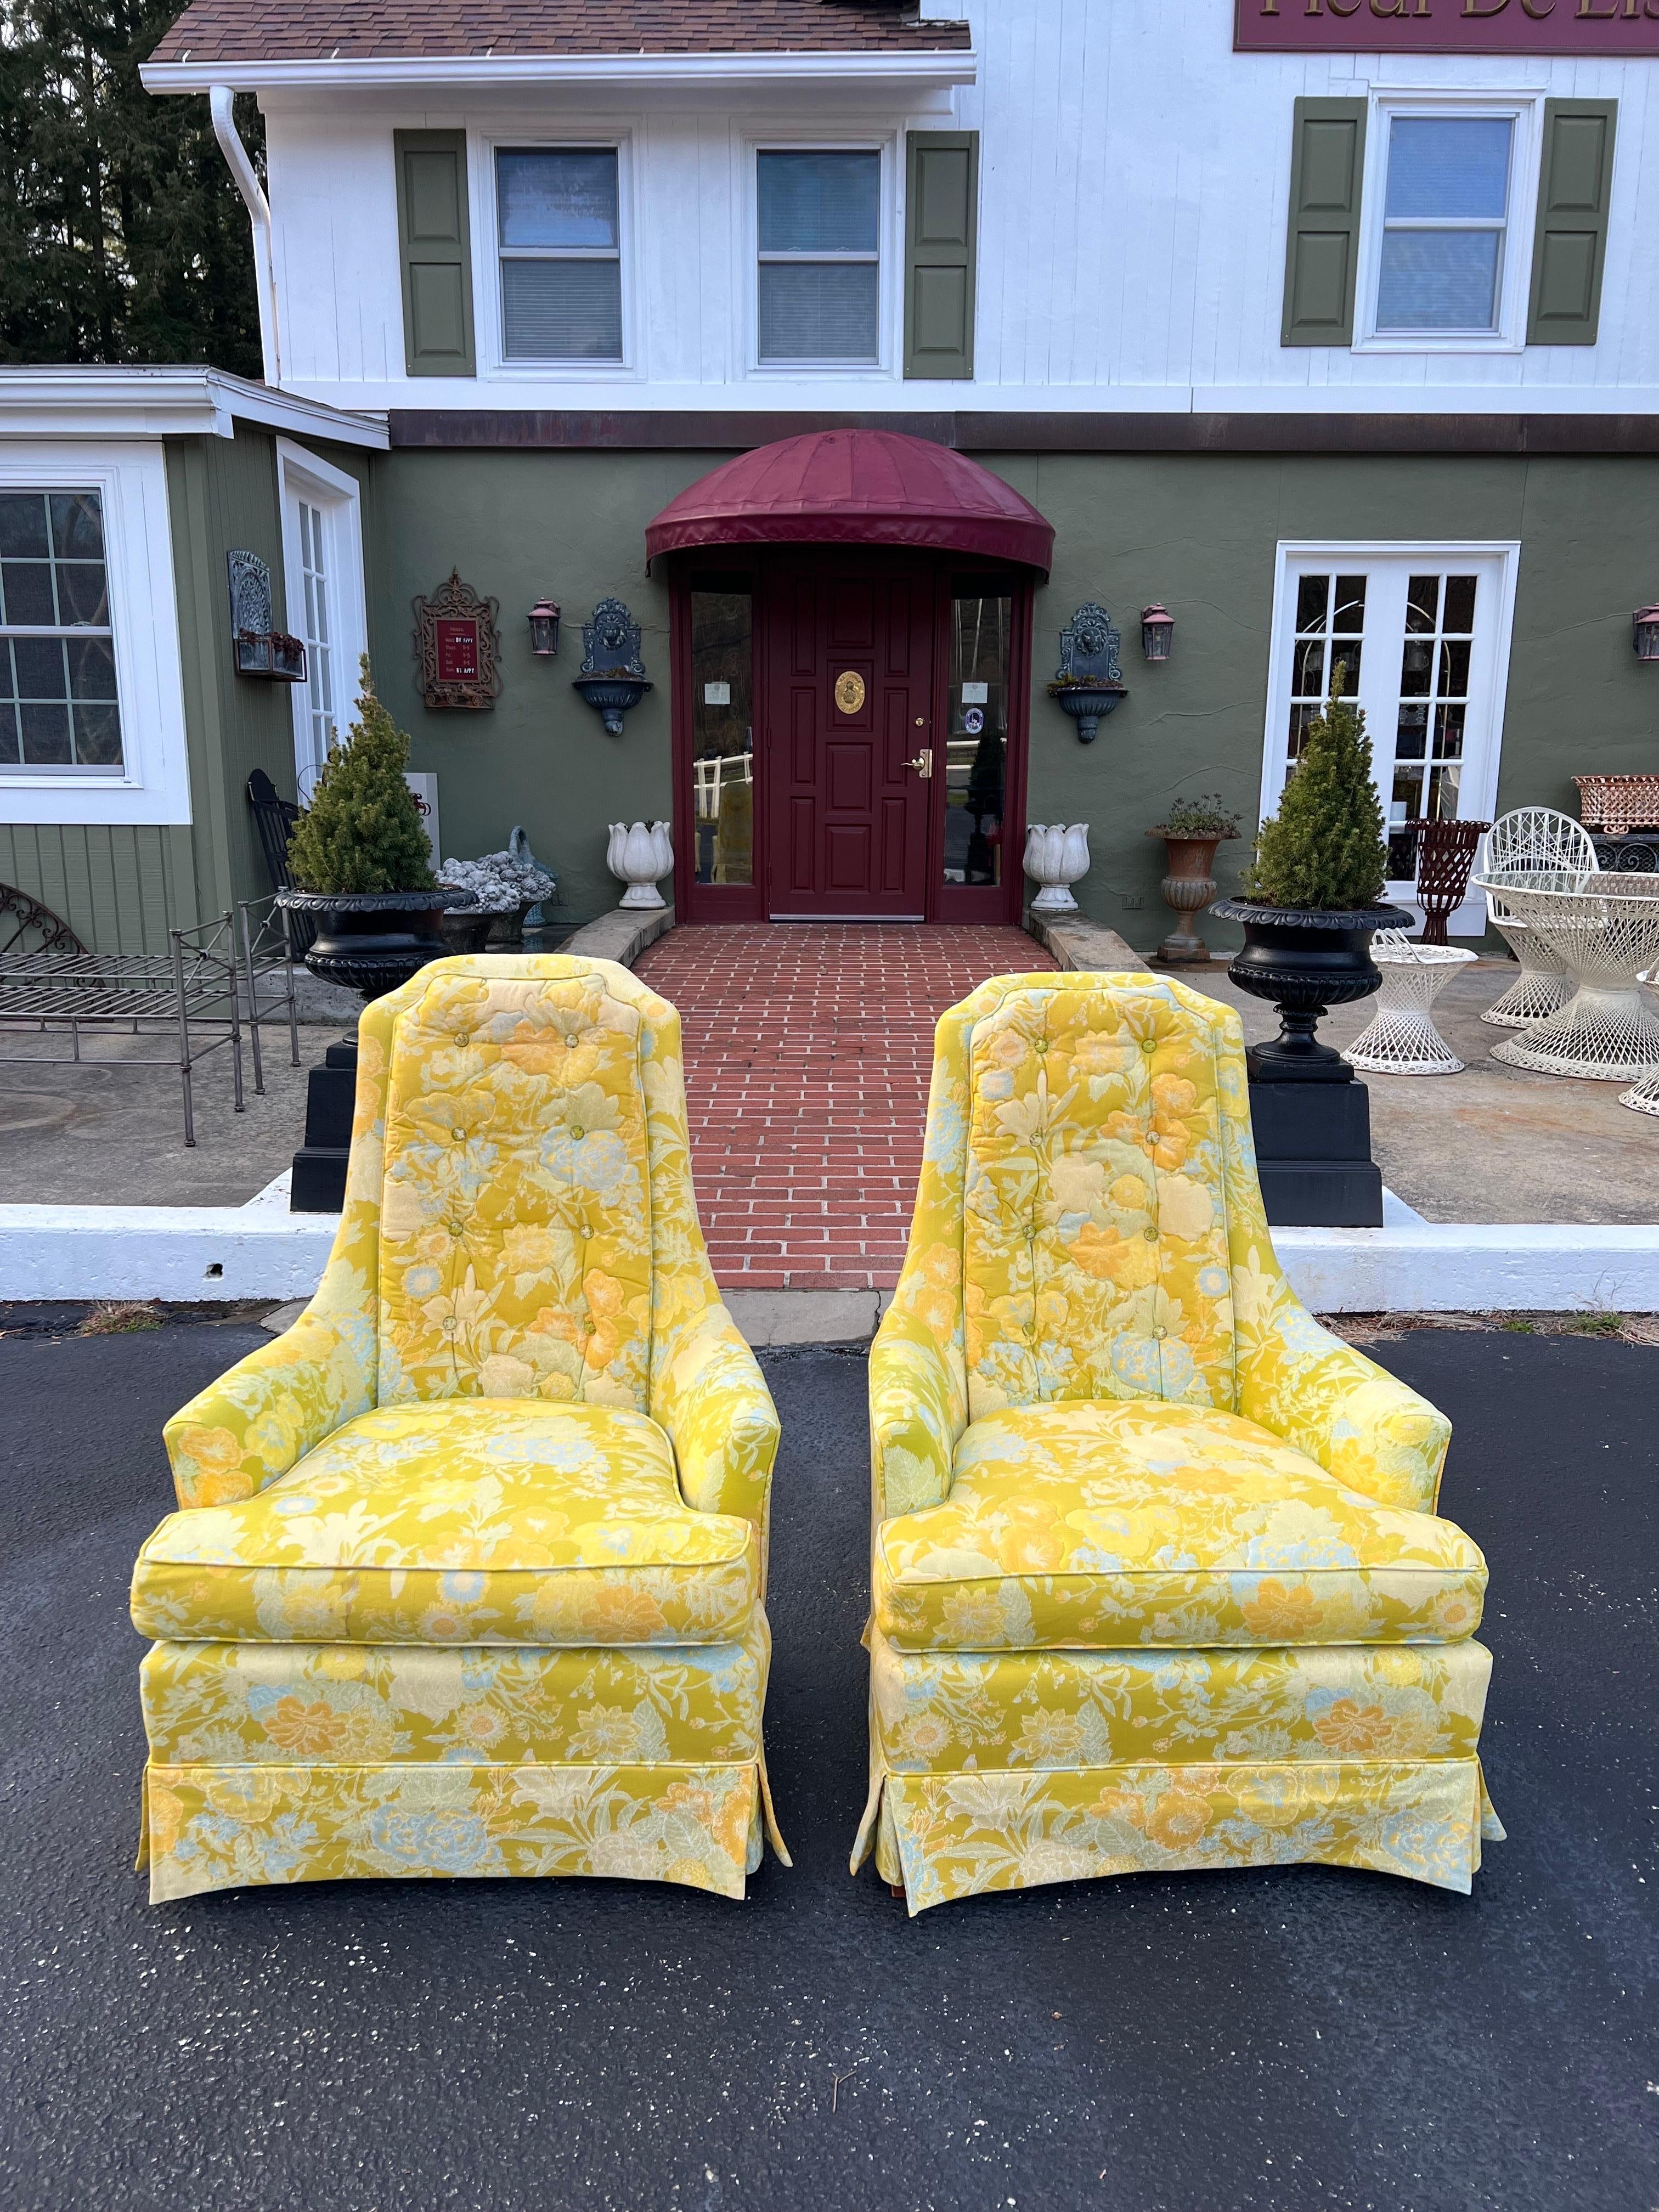 Pair of Dorothy Draper Style High back Chairs. The type of chairs you would see at the famous Colony Hotel in West Palm Beach. Original quilted floral fabric so reminiscent of the 1960's flower power but with more sophistication.
Use as is or